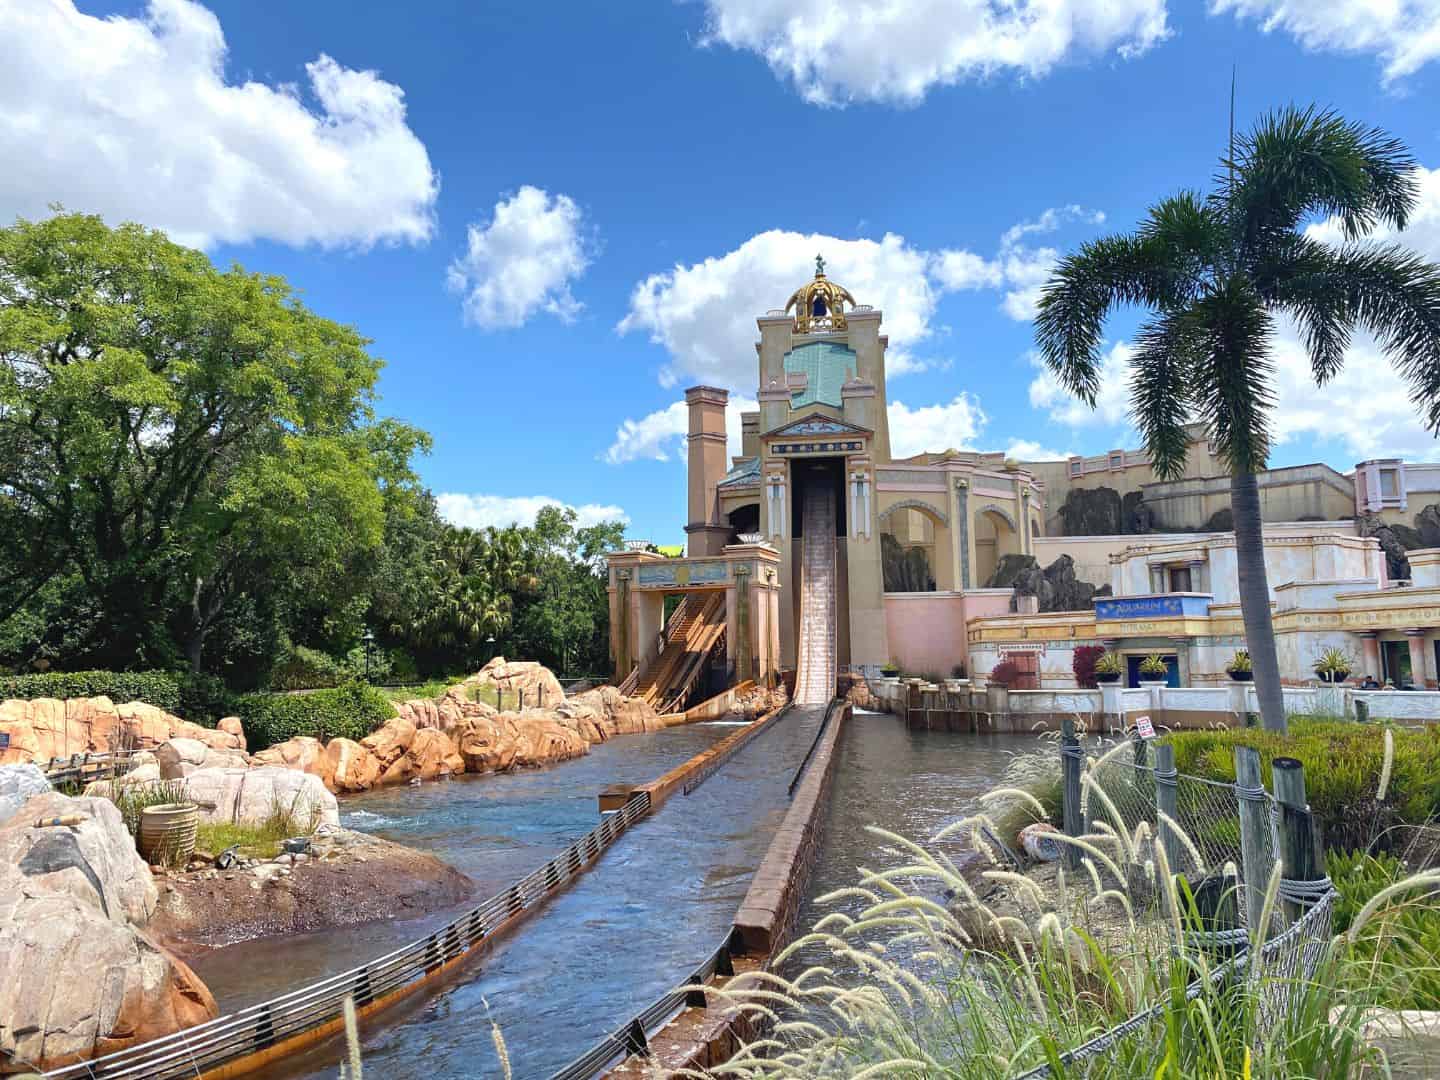 Rides at SeaWorld Journey to Atlantis exterior and large water ride drop